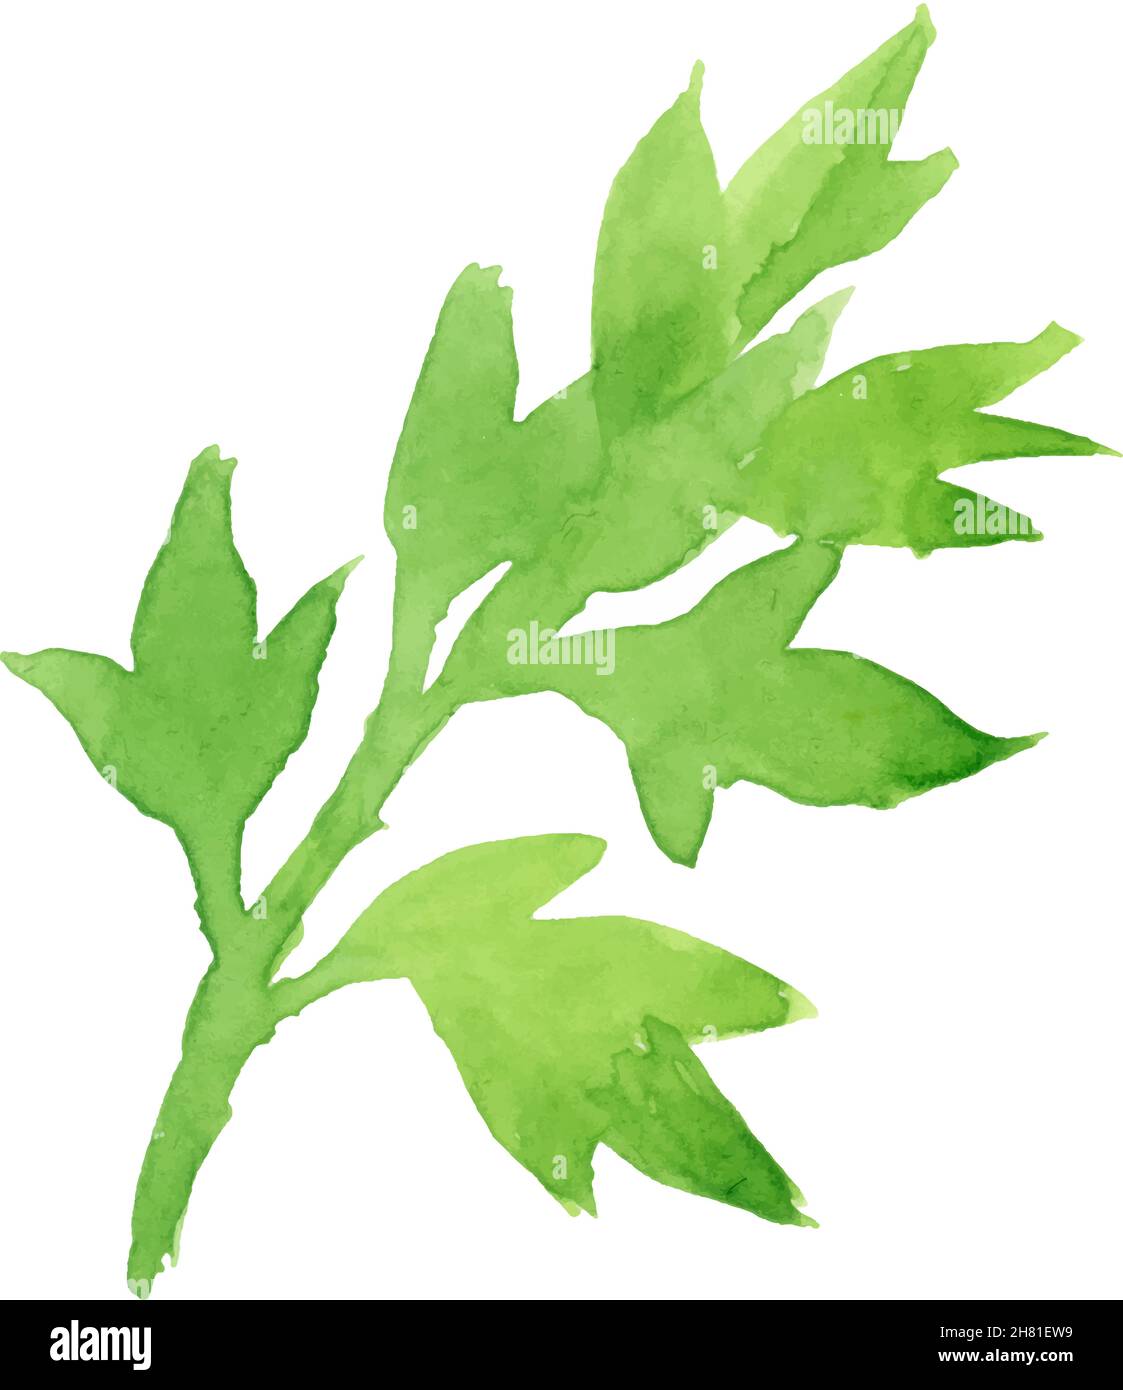 Watercolor image of leaves of parsley on white background Stock Vector